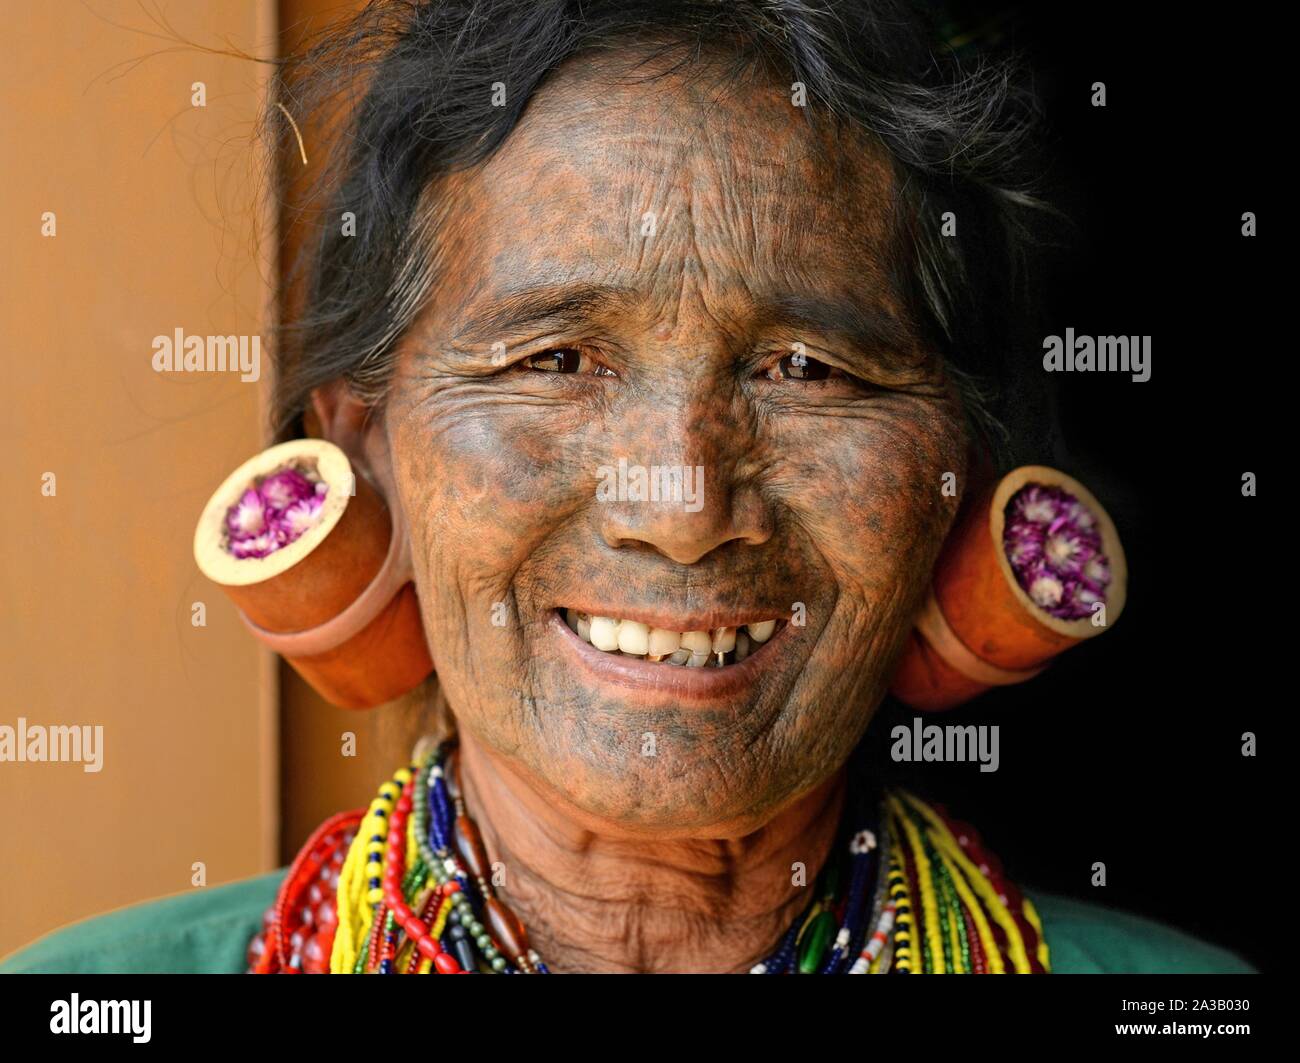 Old Chin Kaang tribal woman with dotted facial tattoo and traditional earlobe plugs in her elongated earlobes smiles for the camera. Stock Photo